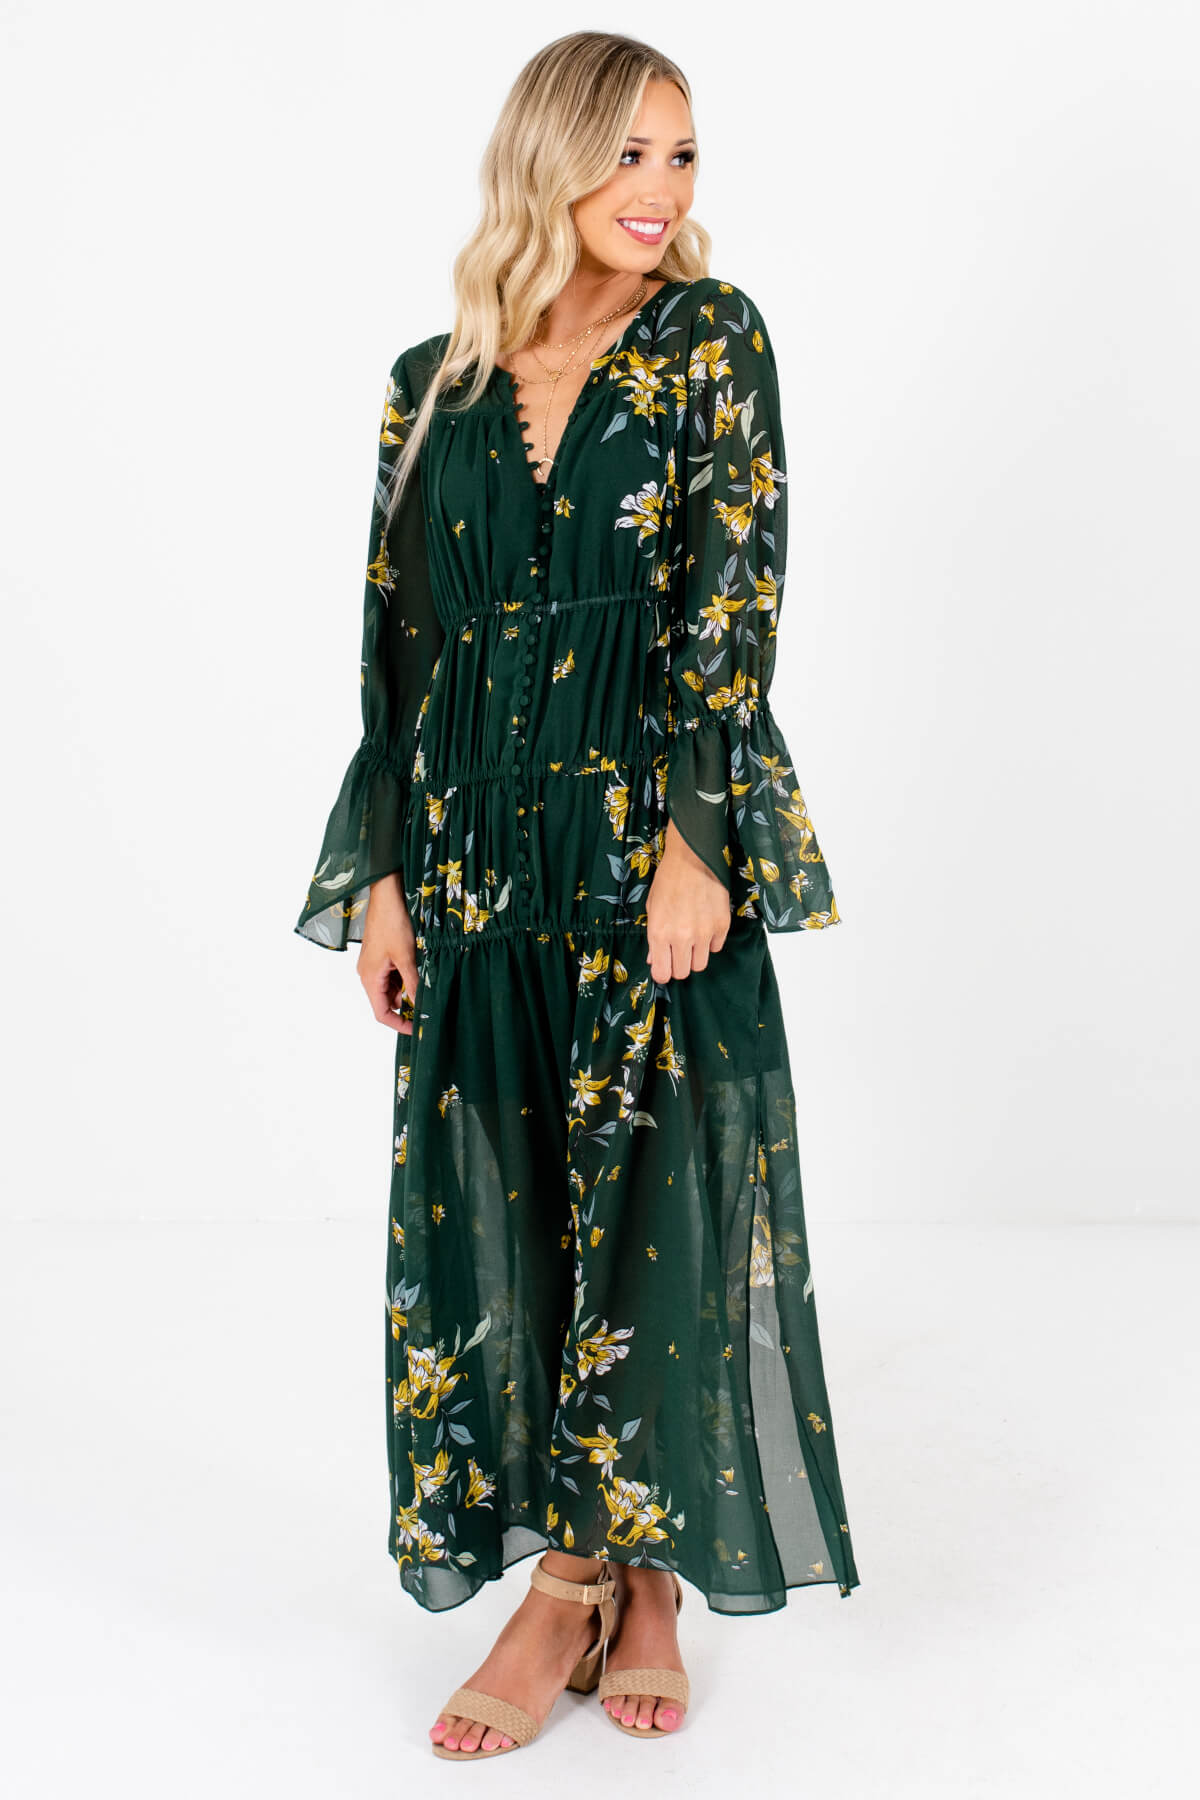 Women's Dark Green Fully Lined Boutique Maxi Dress